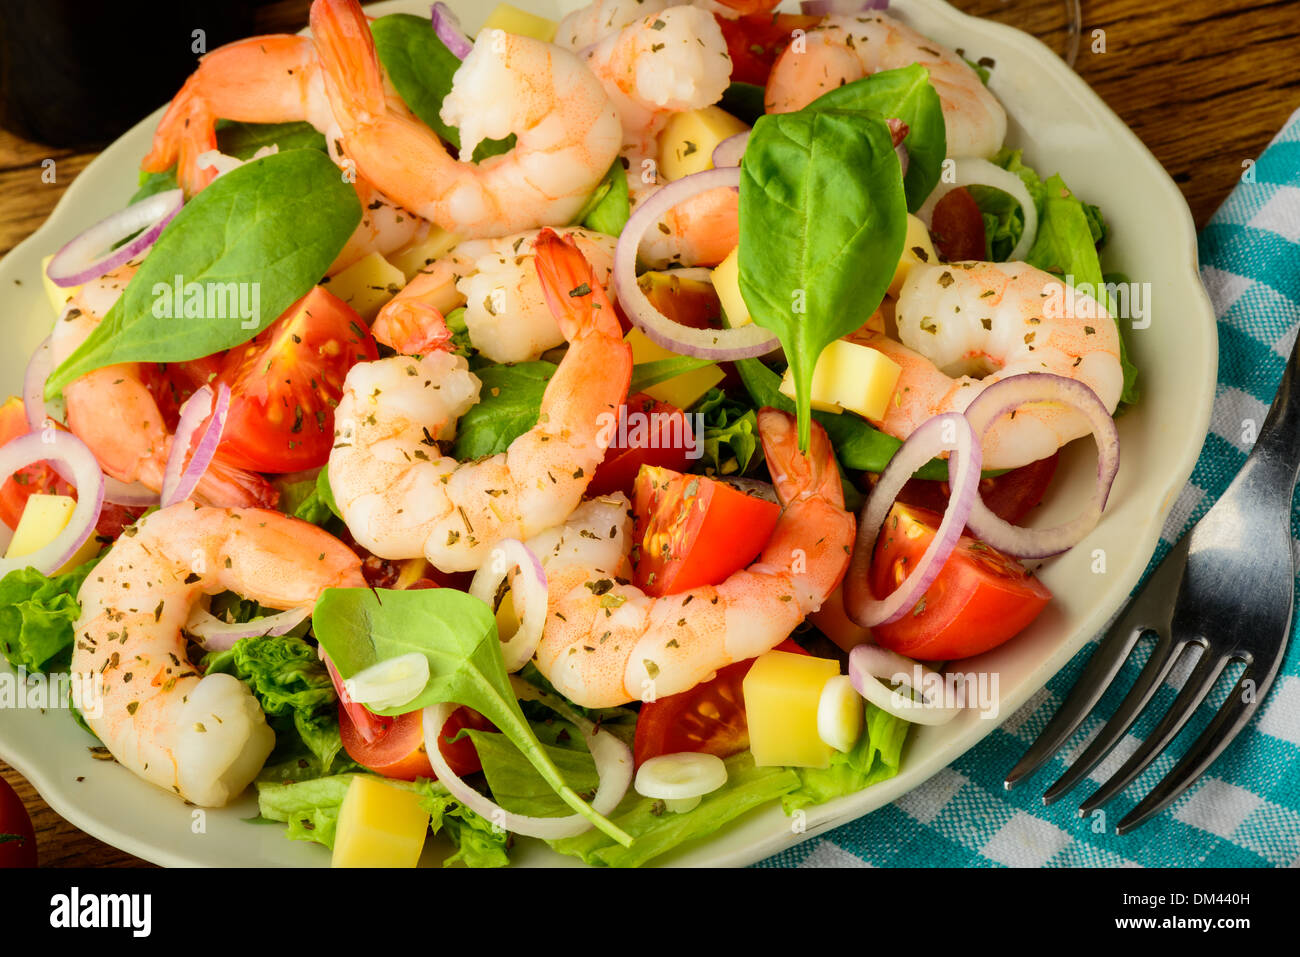 tasty meal with fresh and healthy prawn salad and vegetables Stock Photo